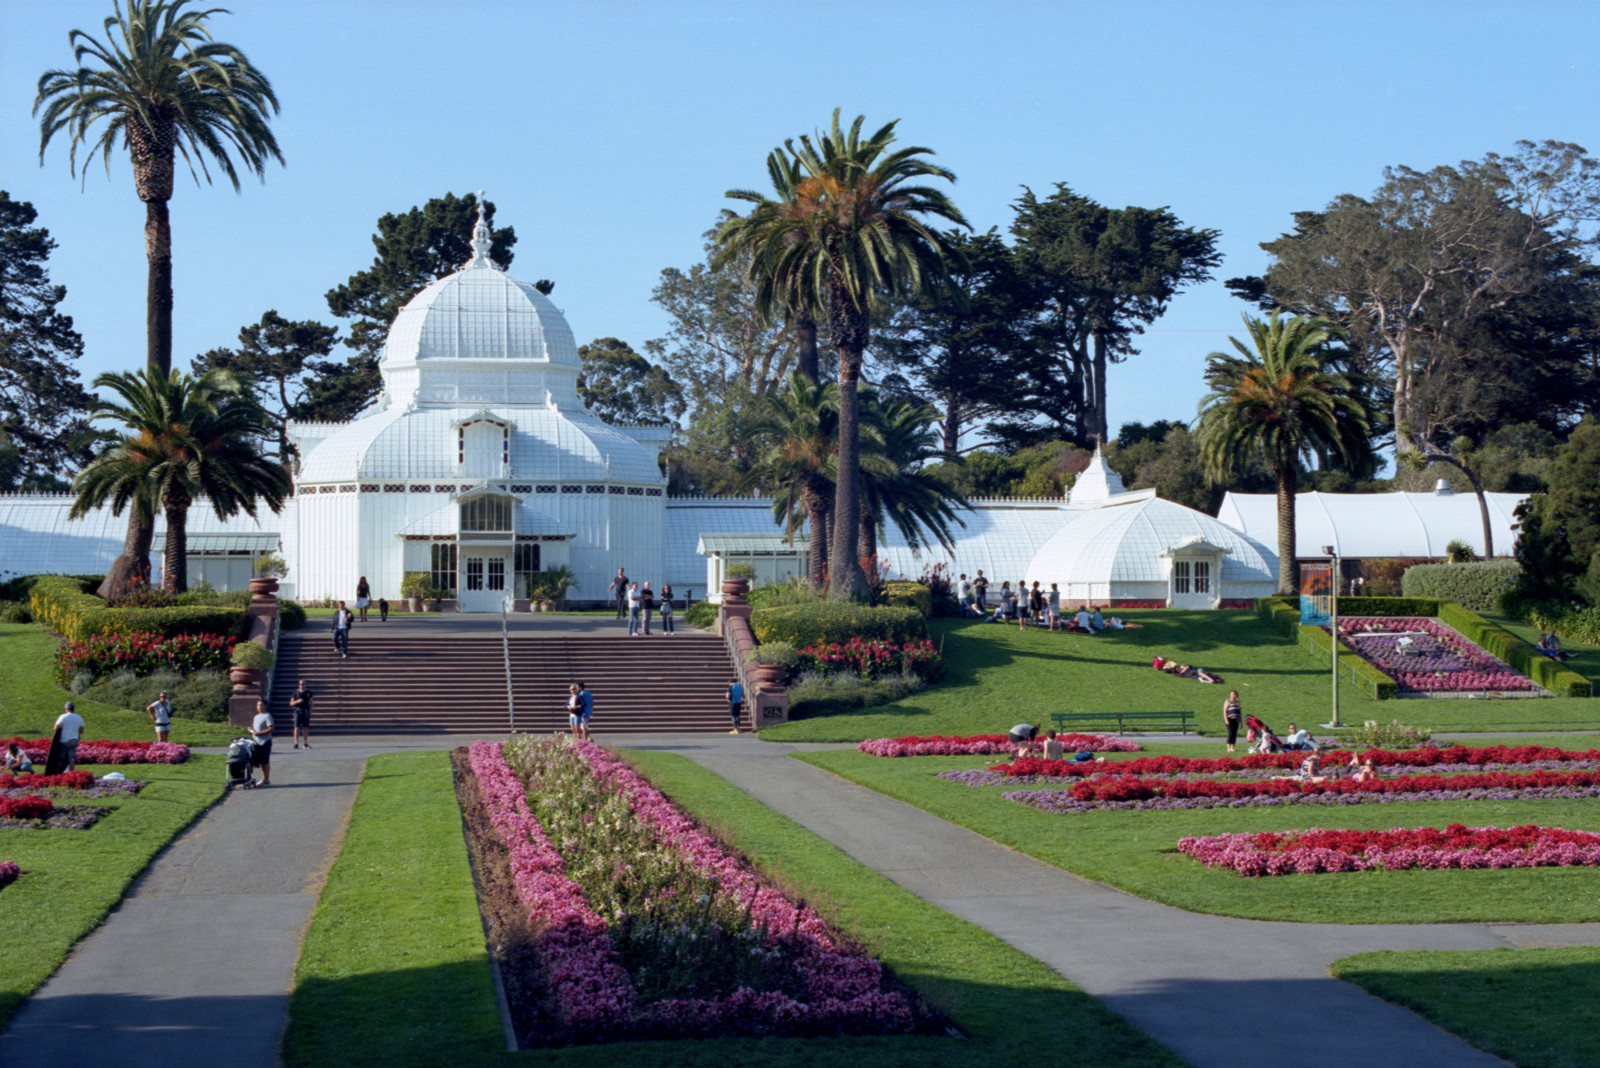 Hall of Flowers in Golden Gate Park, San Francisco.